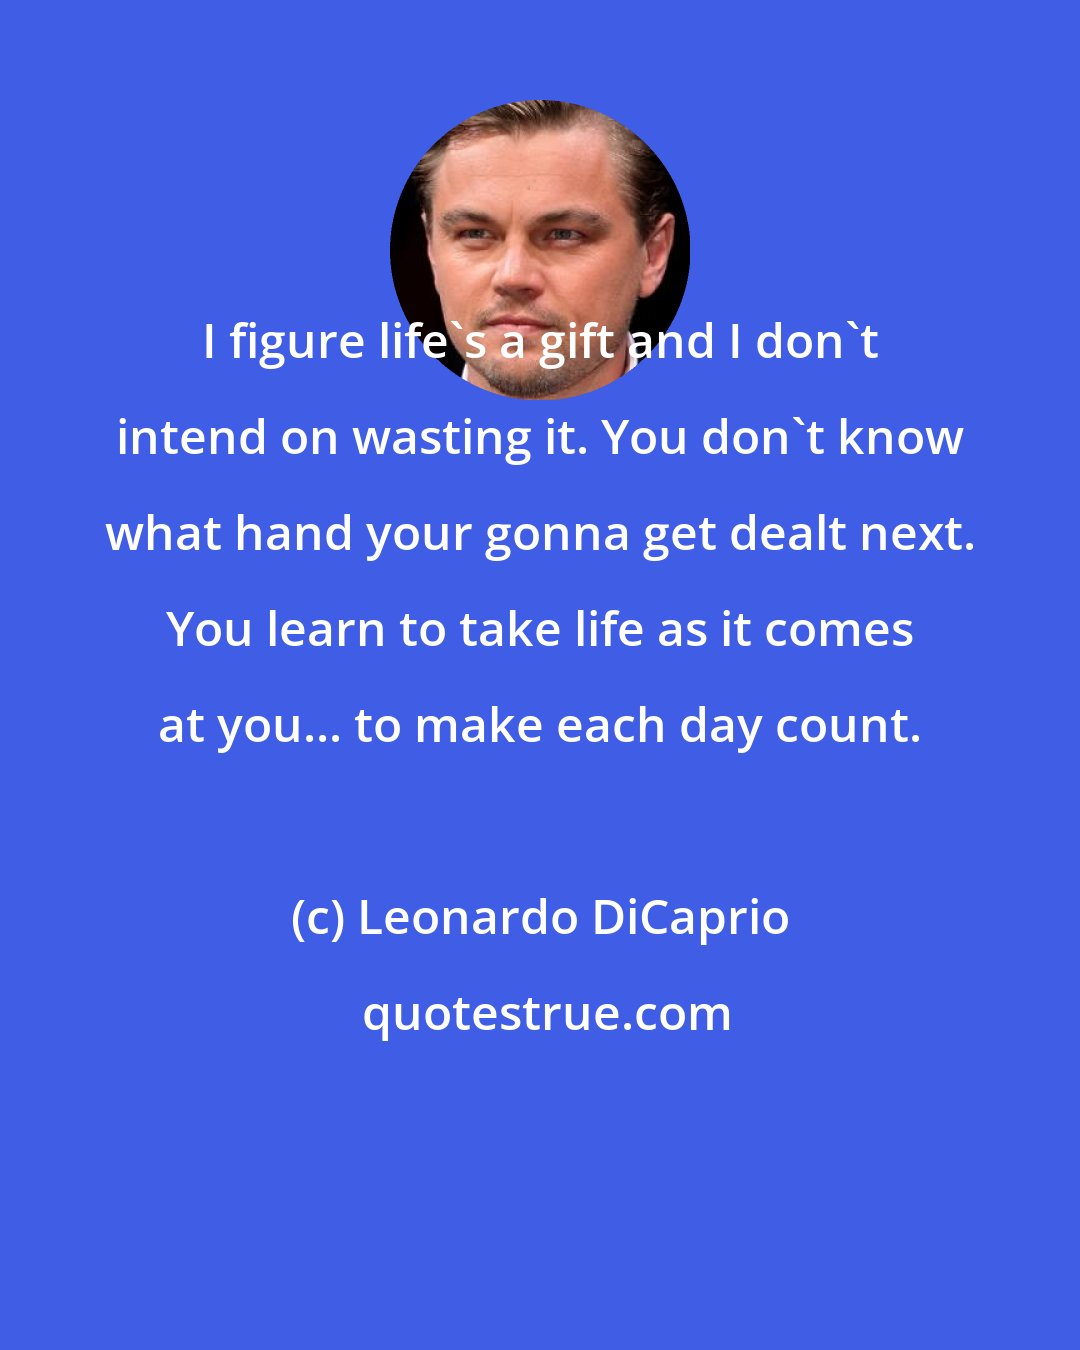 Leonardo DiCaprio: I figure life's a gift and I don't intend on wasting it. You don't know what hand your gonna get dealt next. You learn to take life as it comes at you... to make each day count.